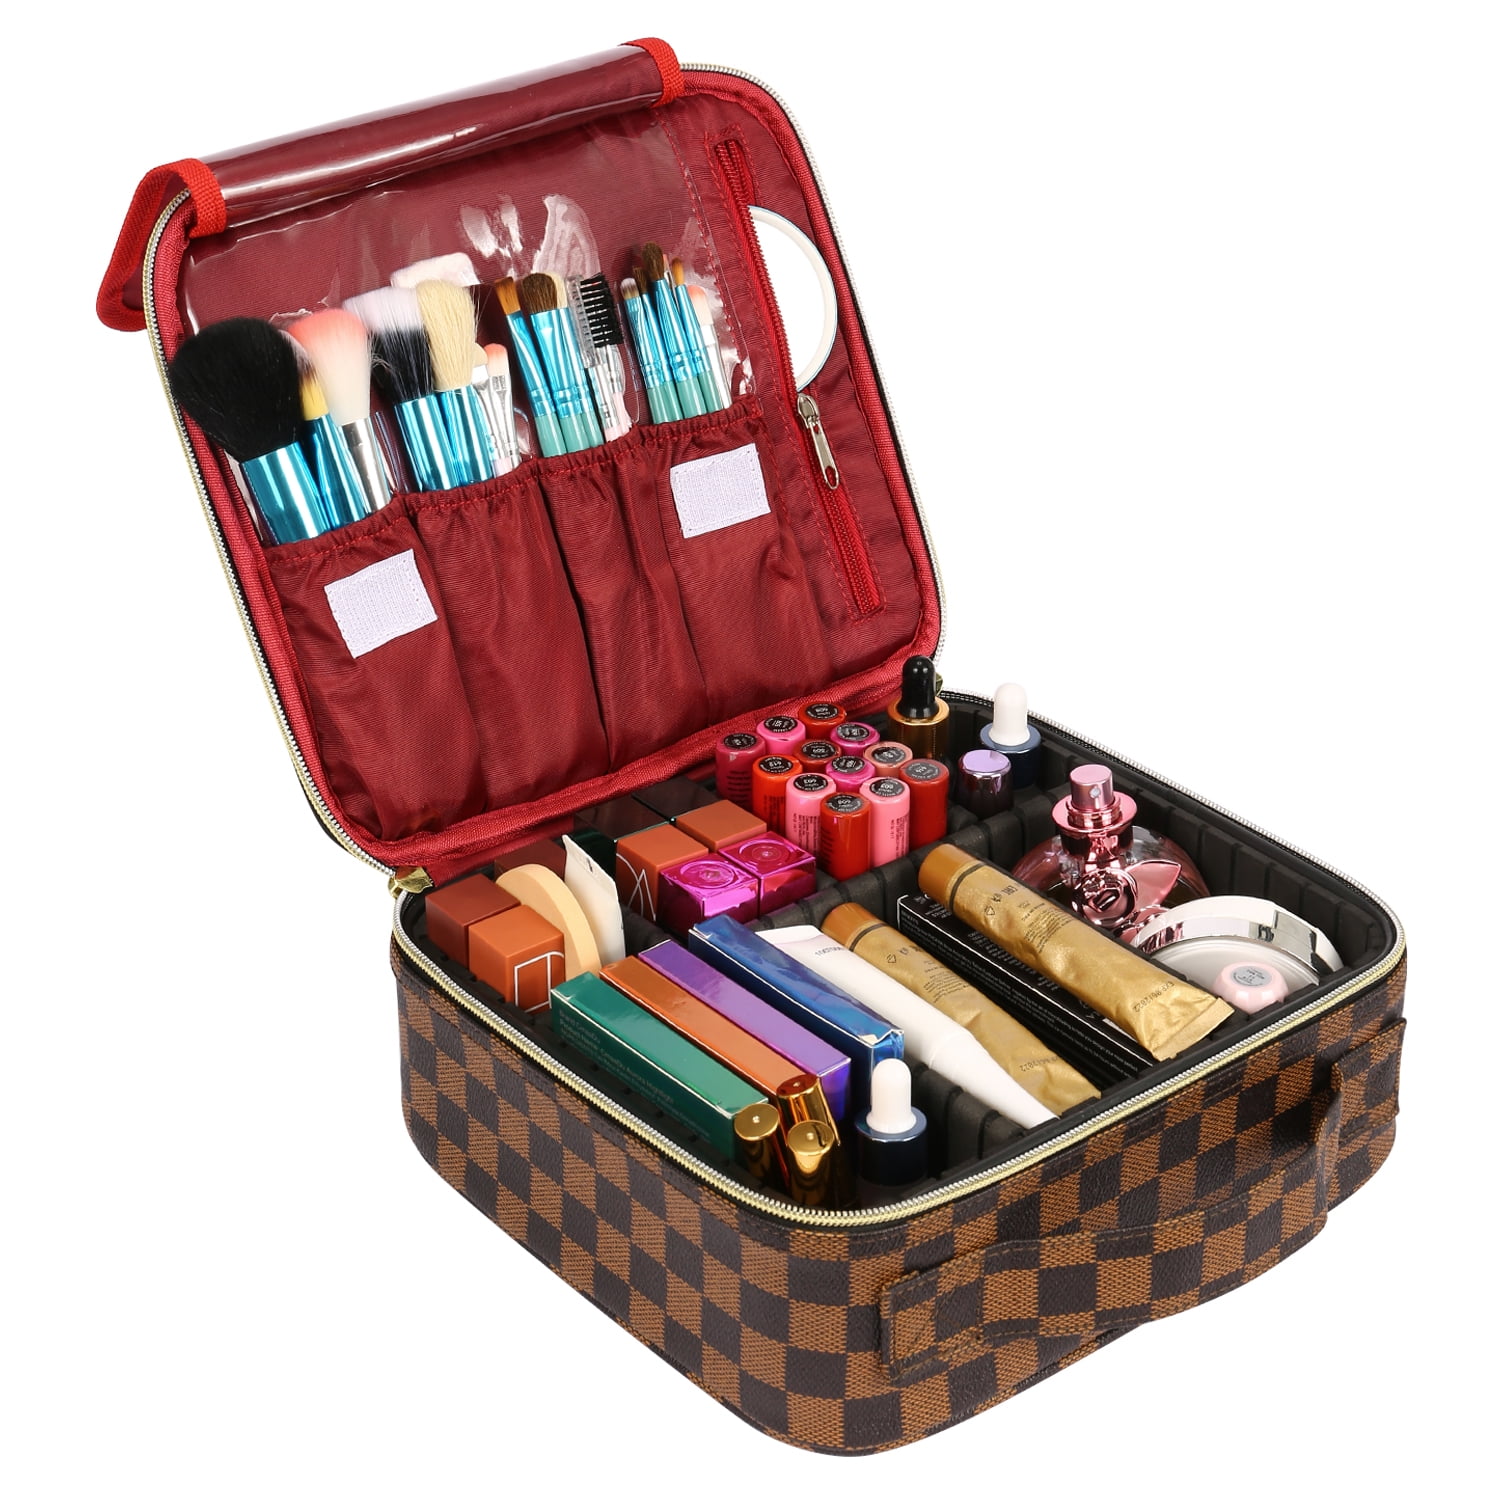 Bag for Women Travel Case Leather Cosmetic Organizer Tools Jewelry -